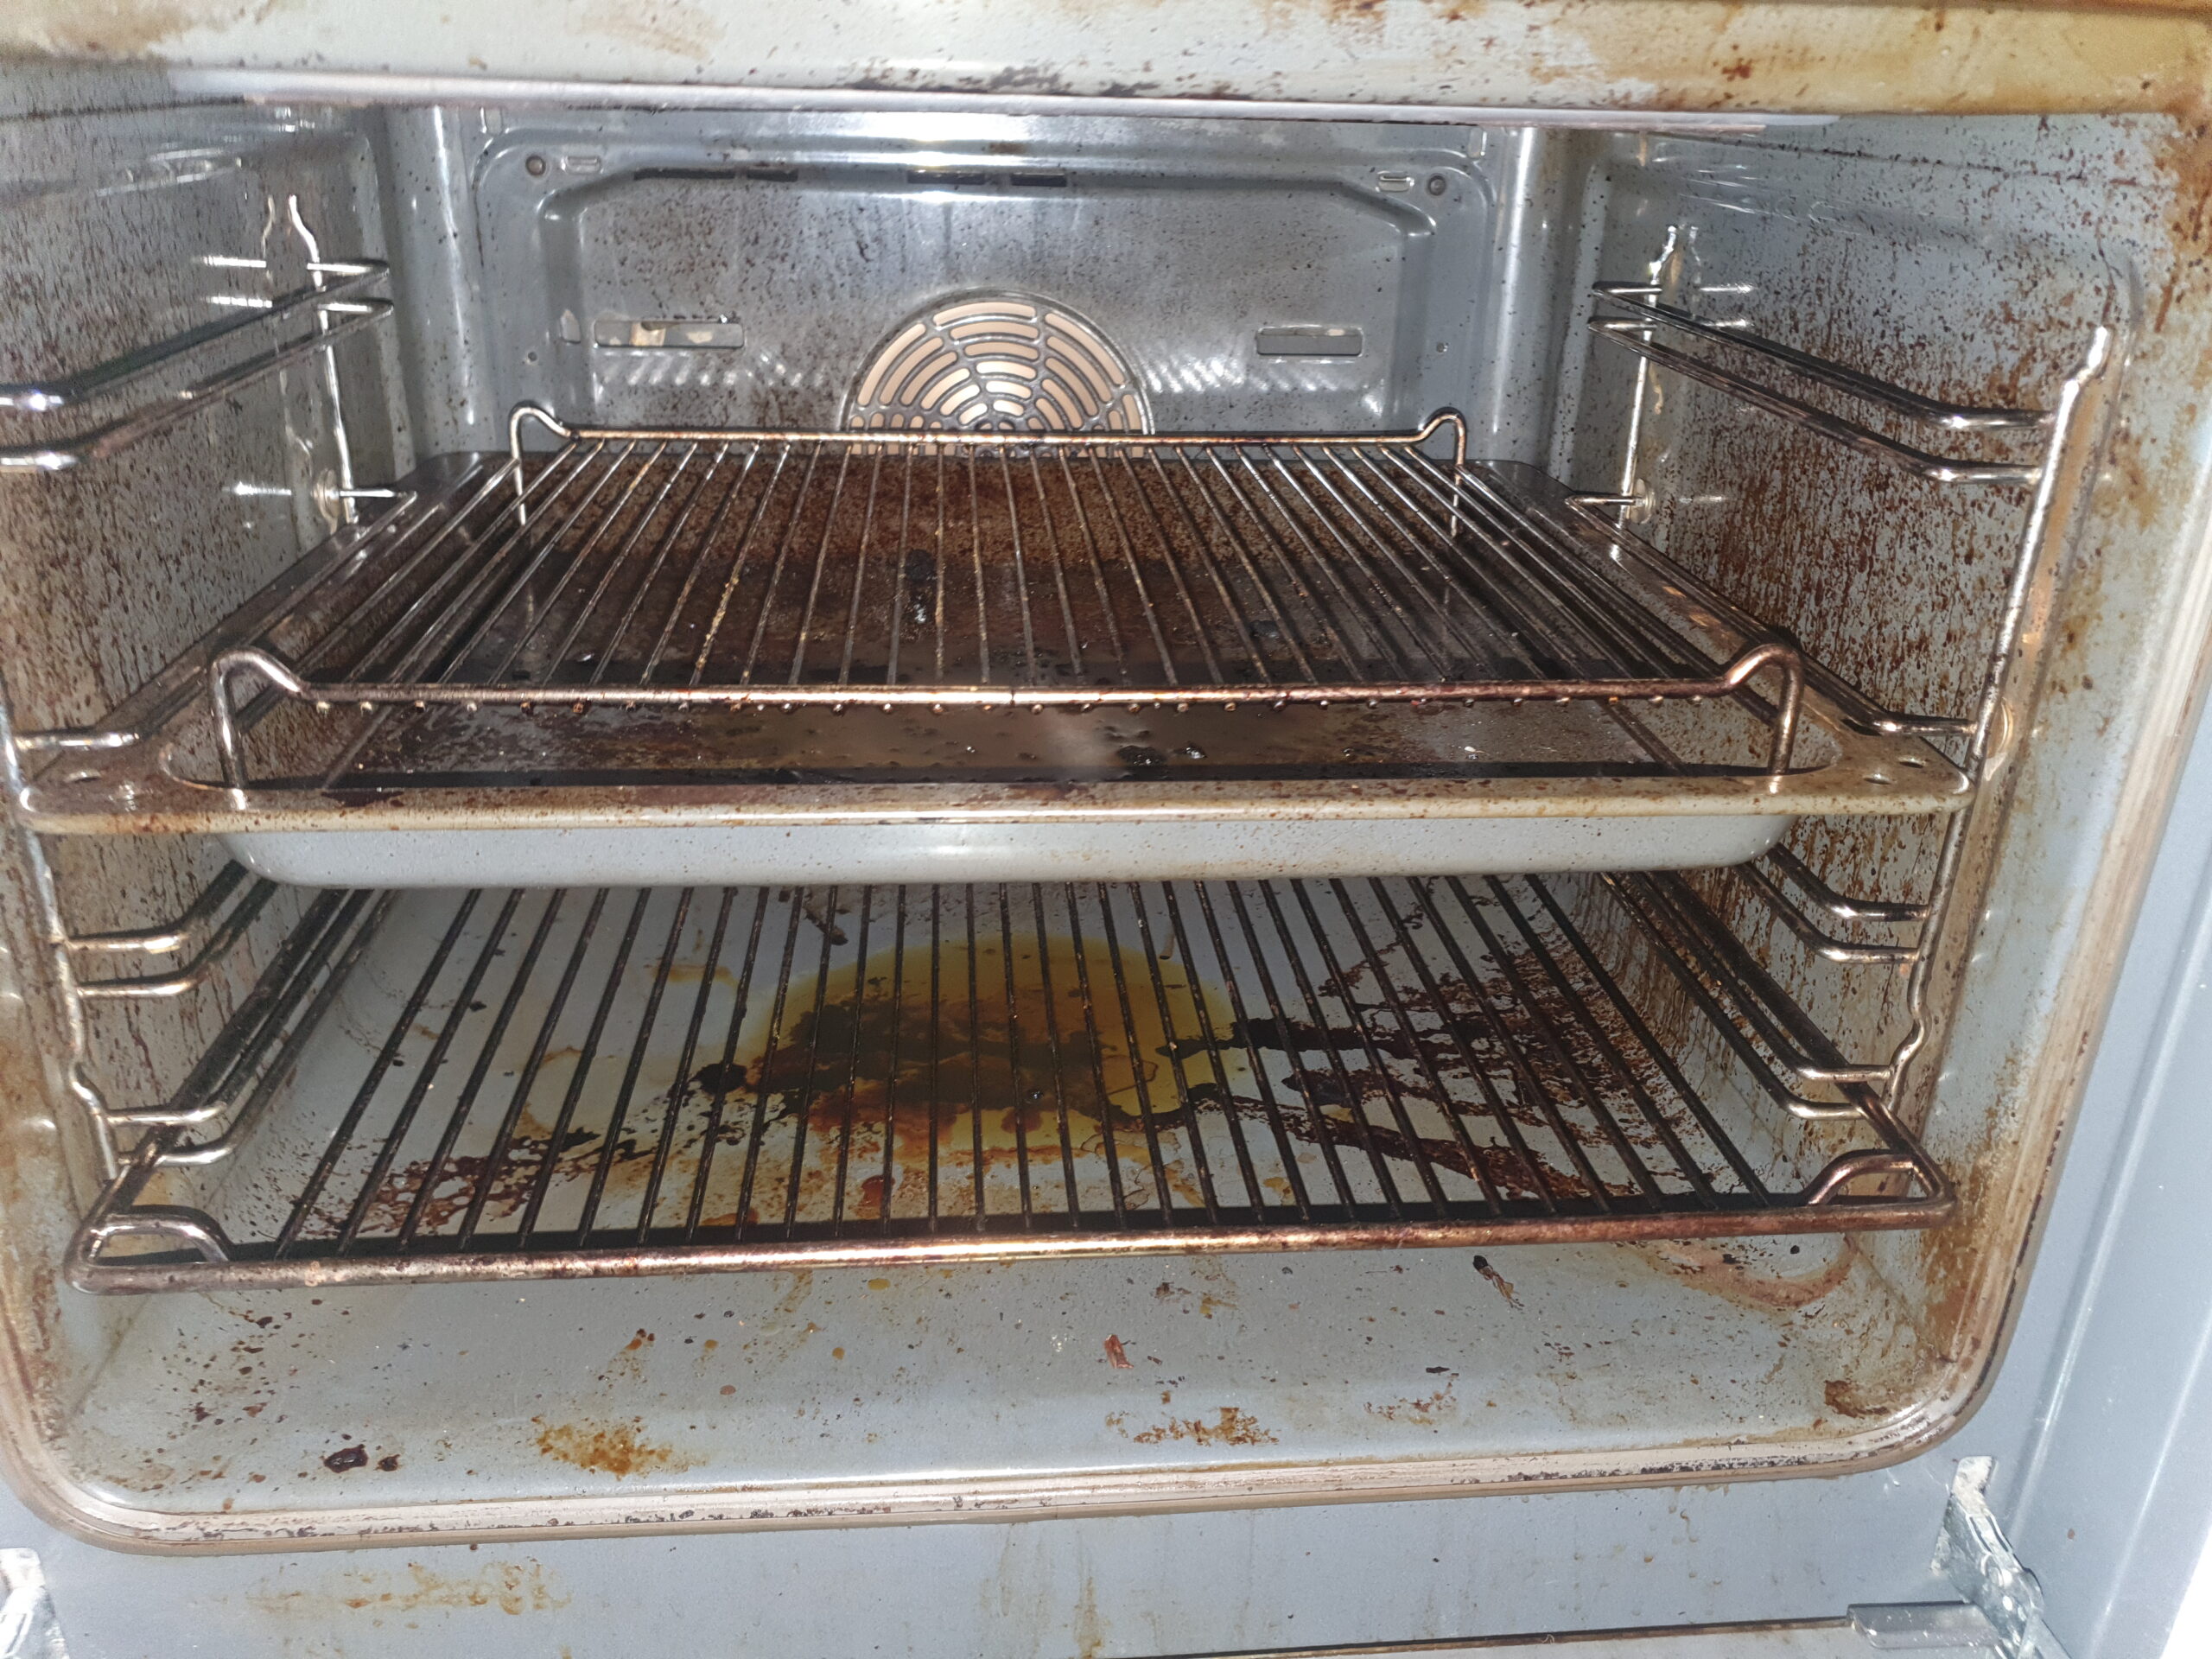 dirty oven